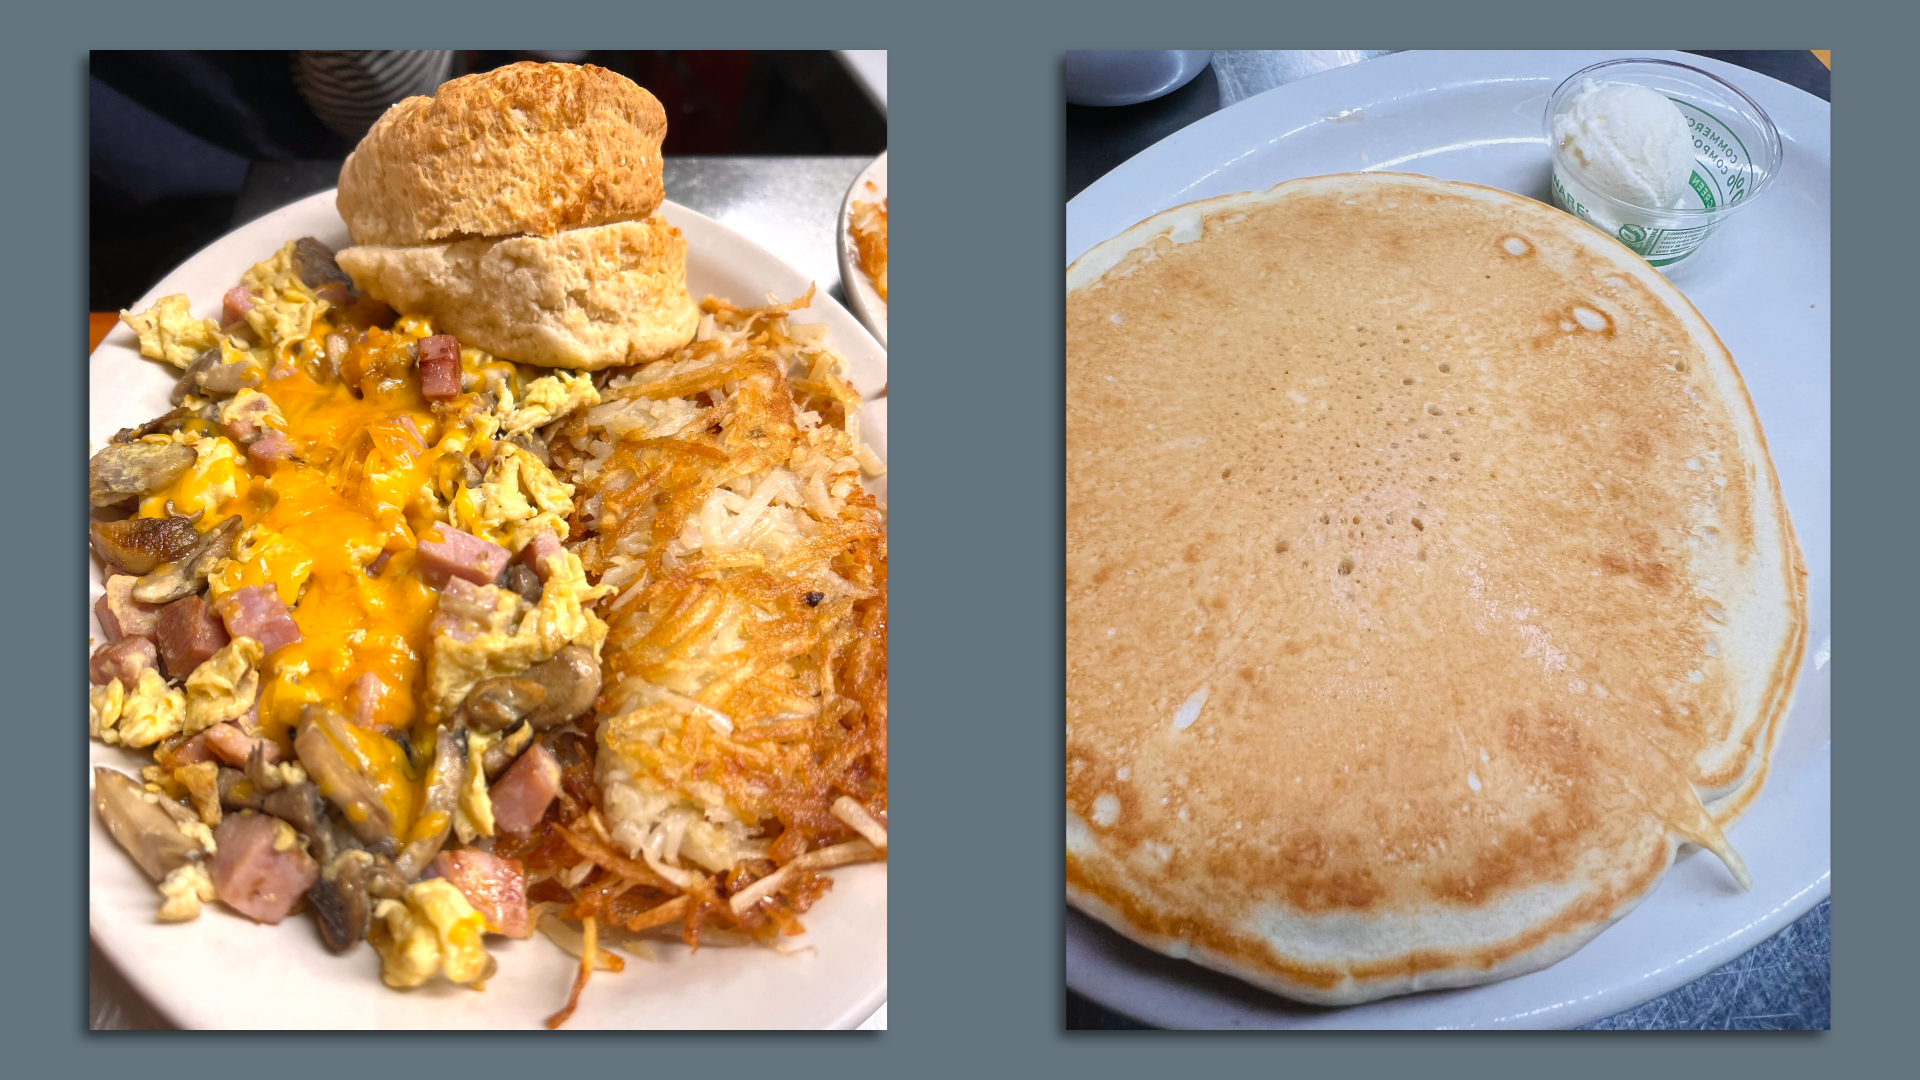 Two plates, one with an omelette, hashbrown and biscuits, the other with pancakes. 